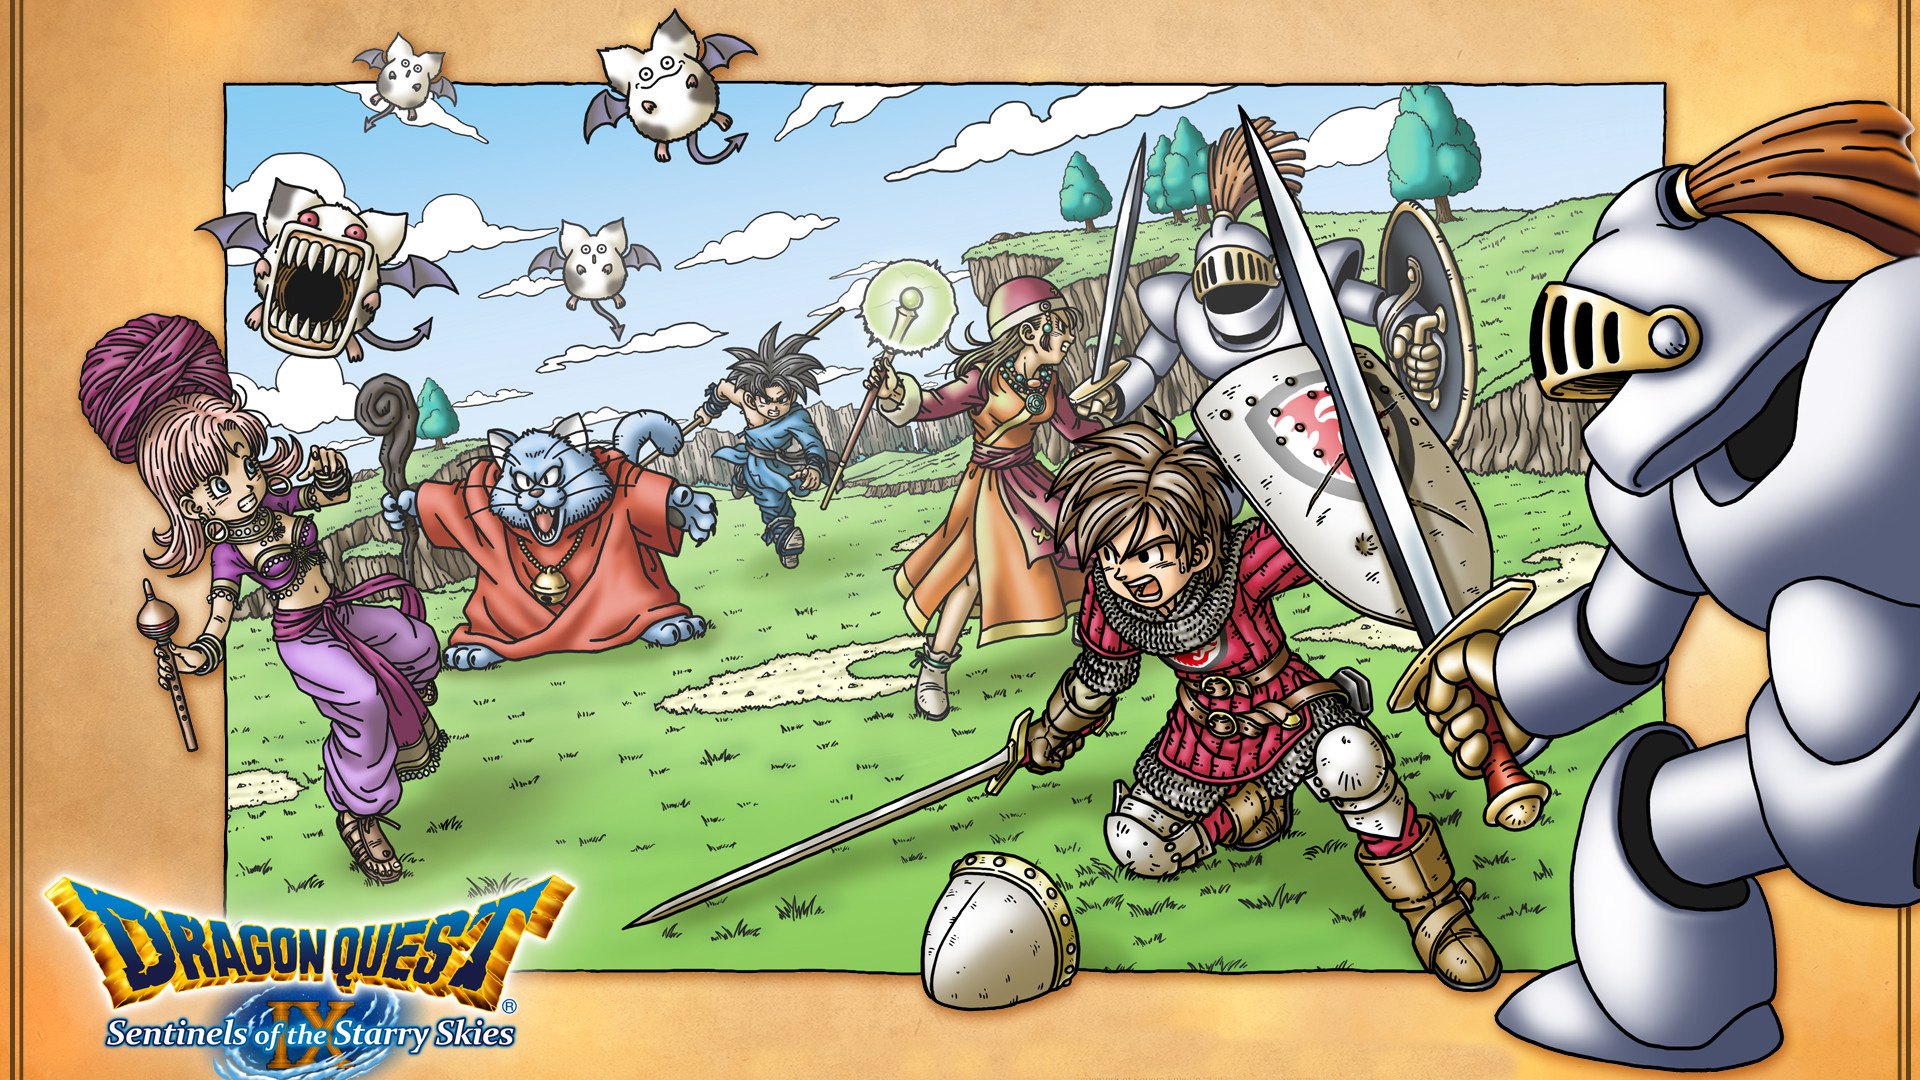 Video Game Dragon Quest IX Sentinels Of The Starry Skies 1920x1080